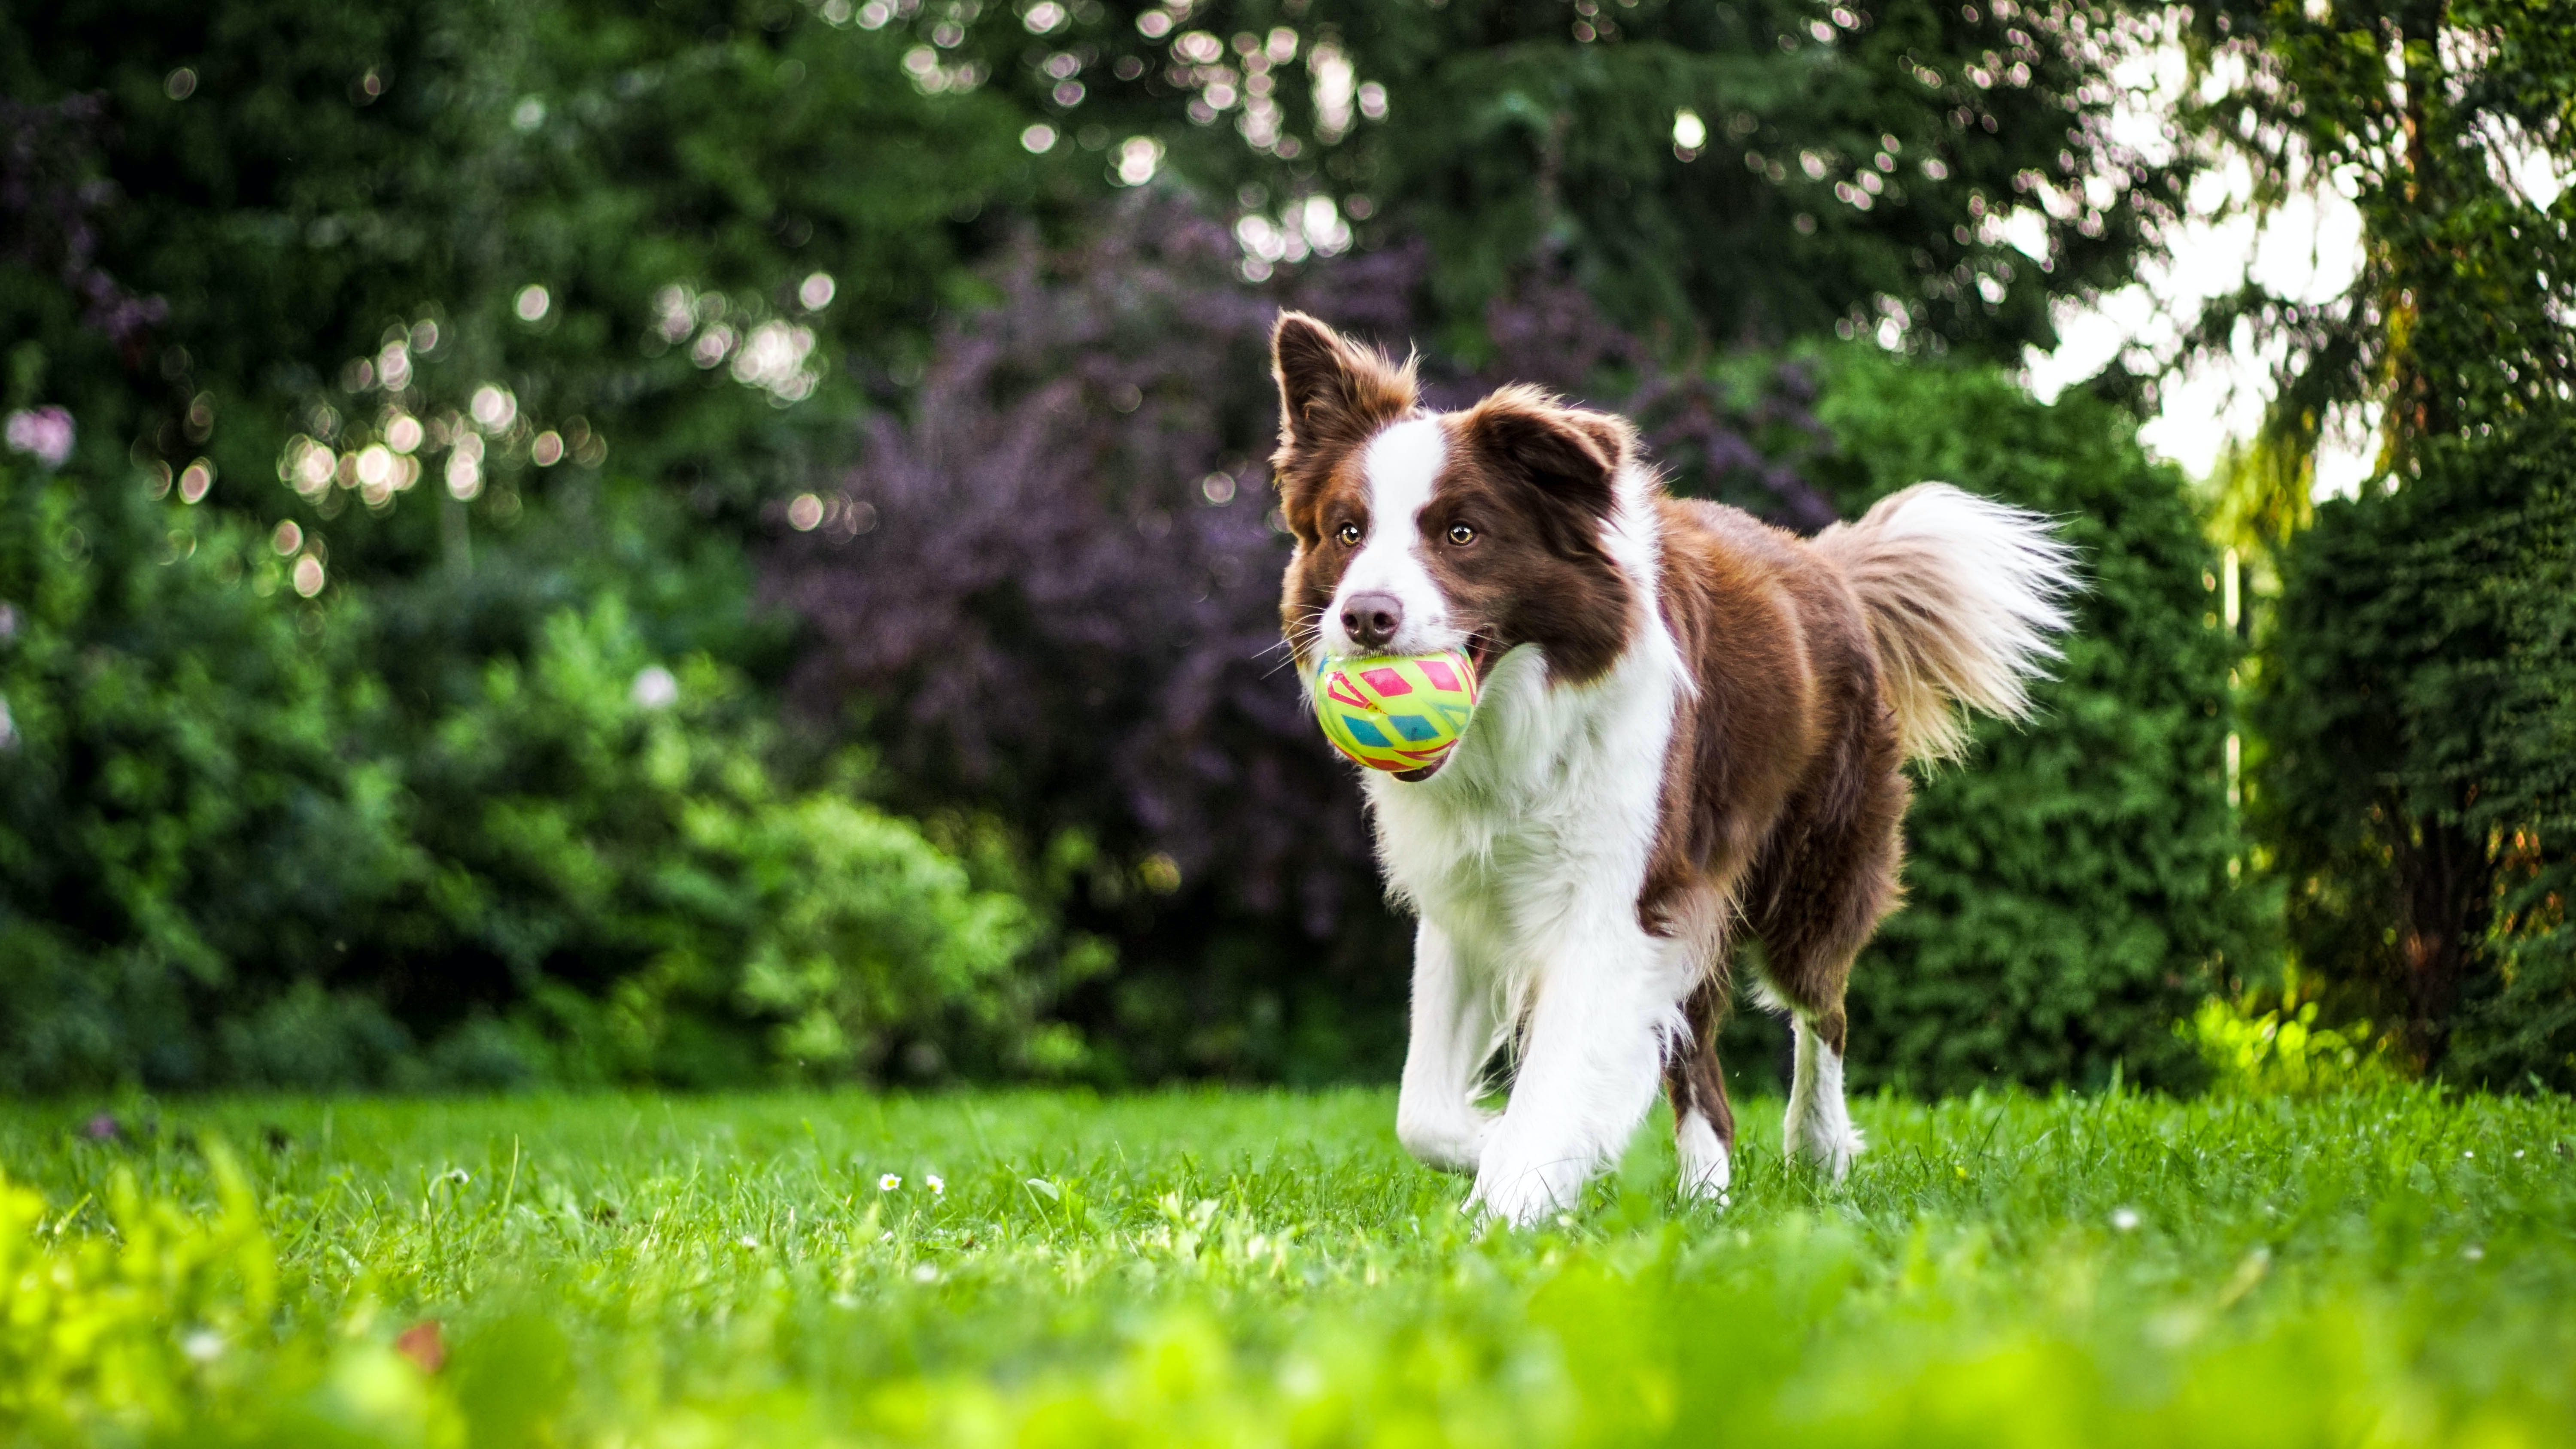 Dog running in the grass with a ball in its mouth.